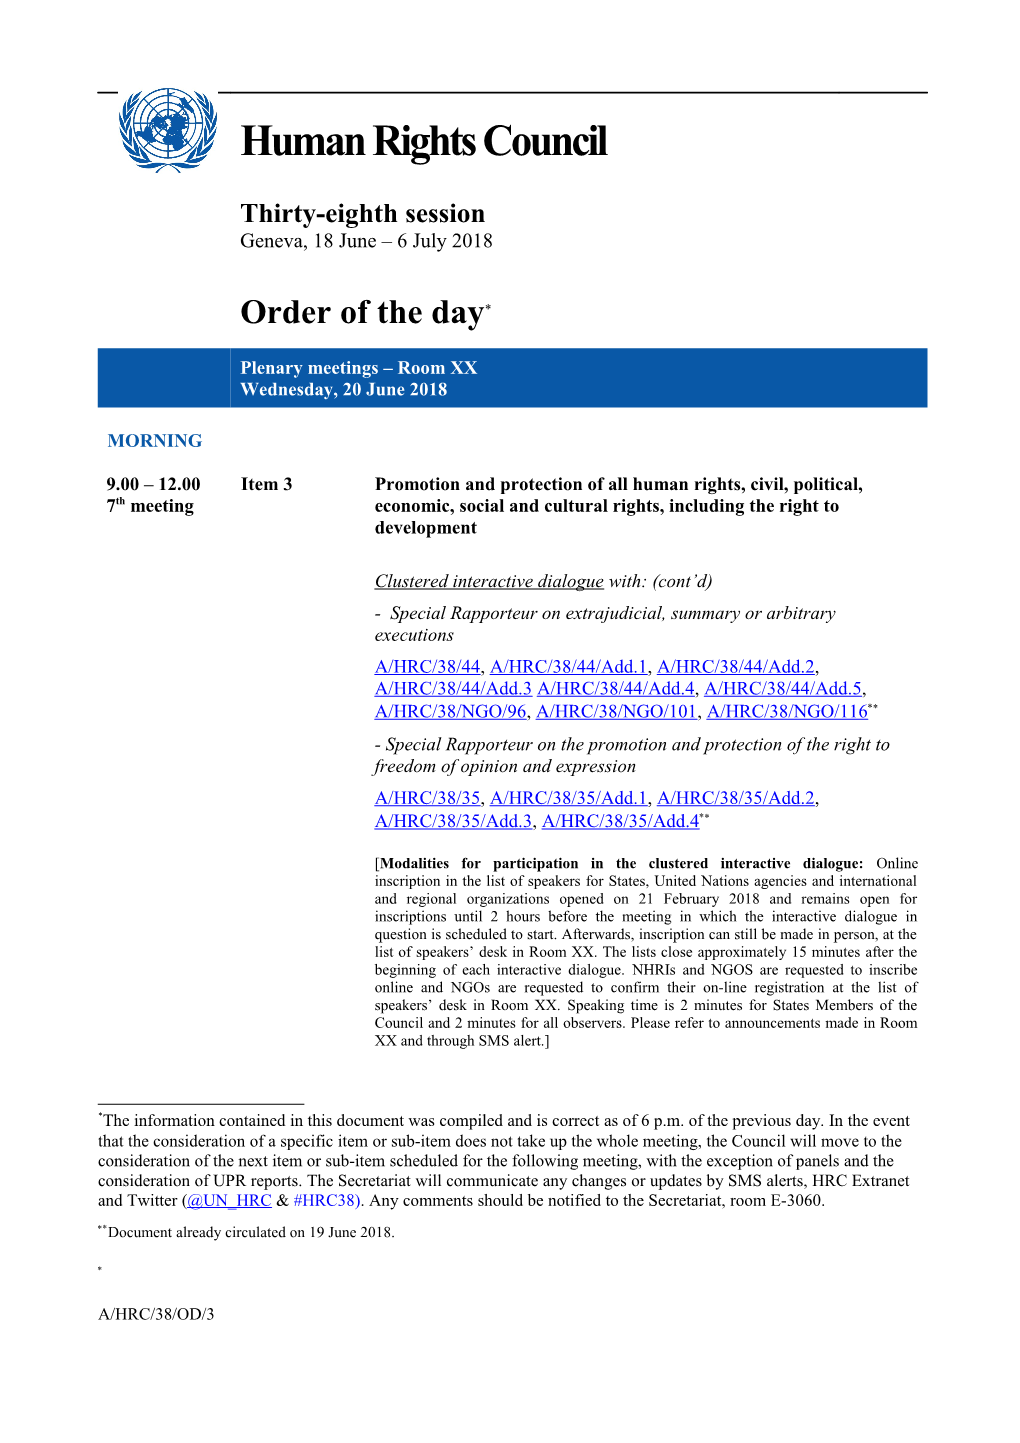 Order of the Day, Wednesday, 20 June 2018